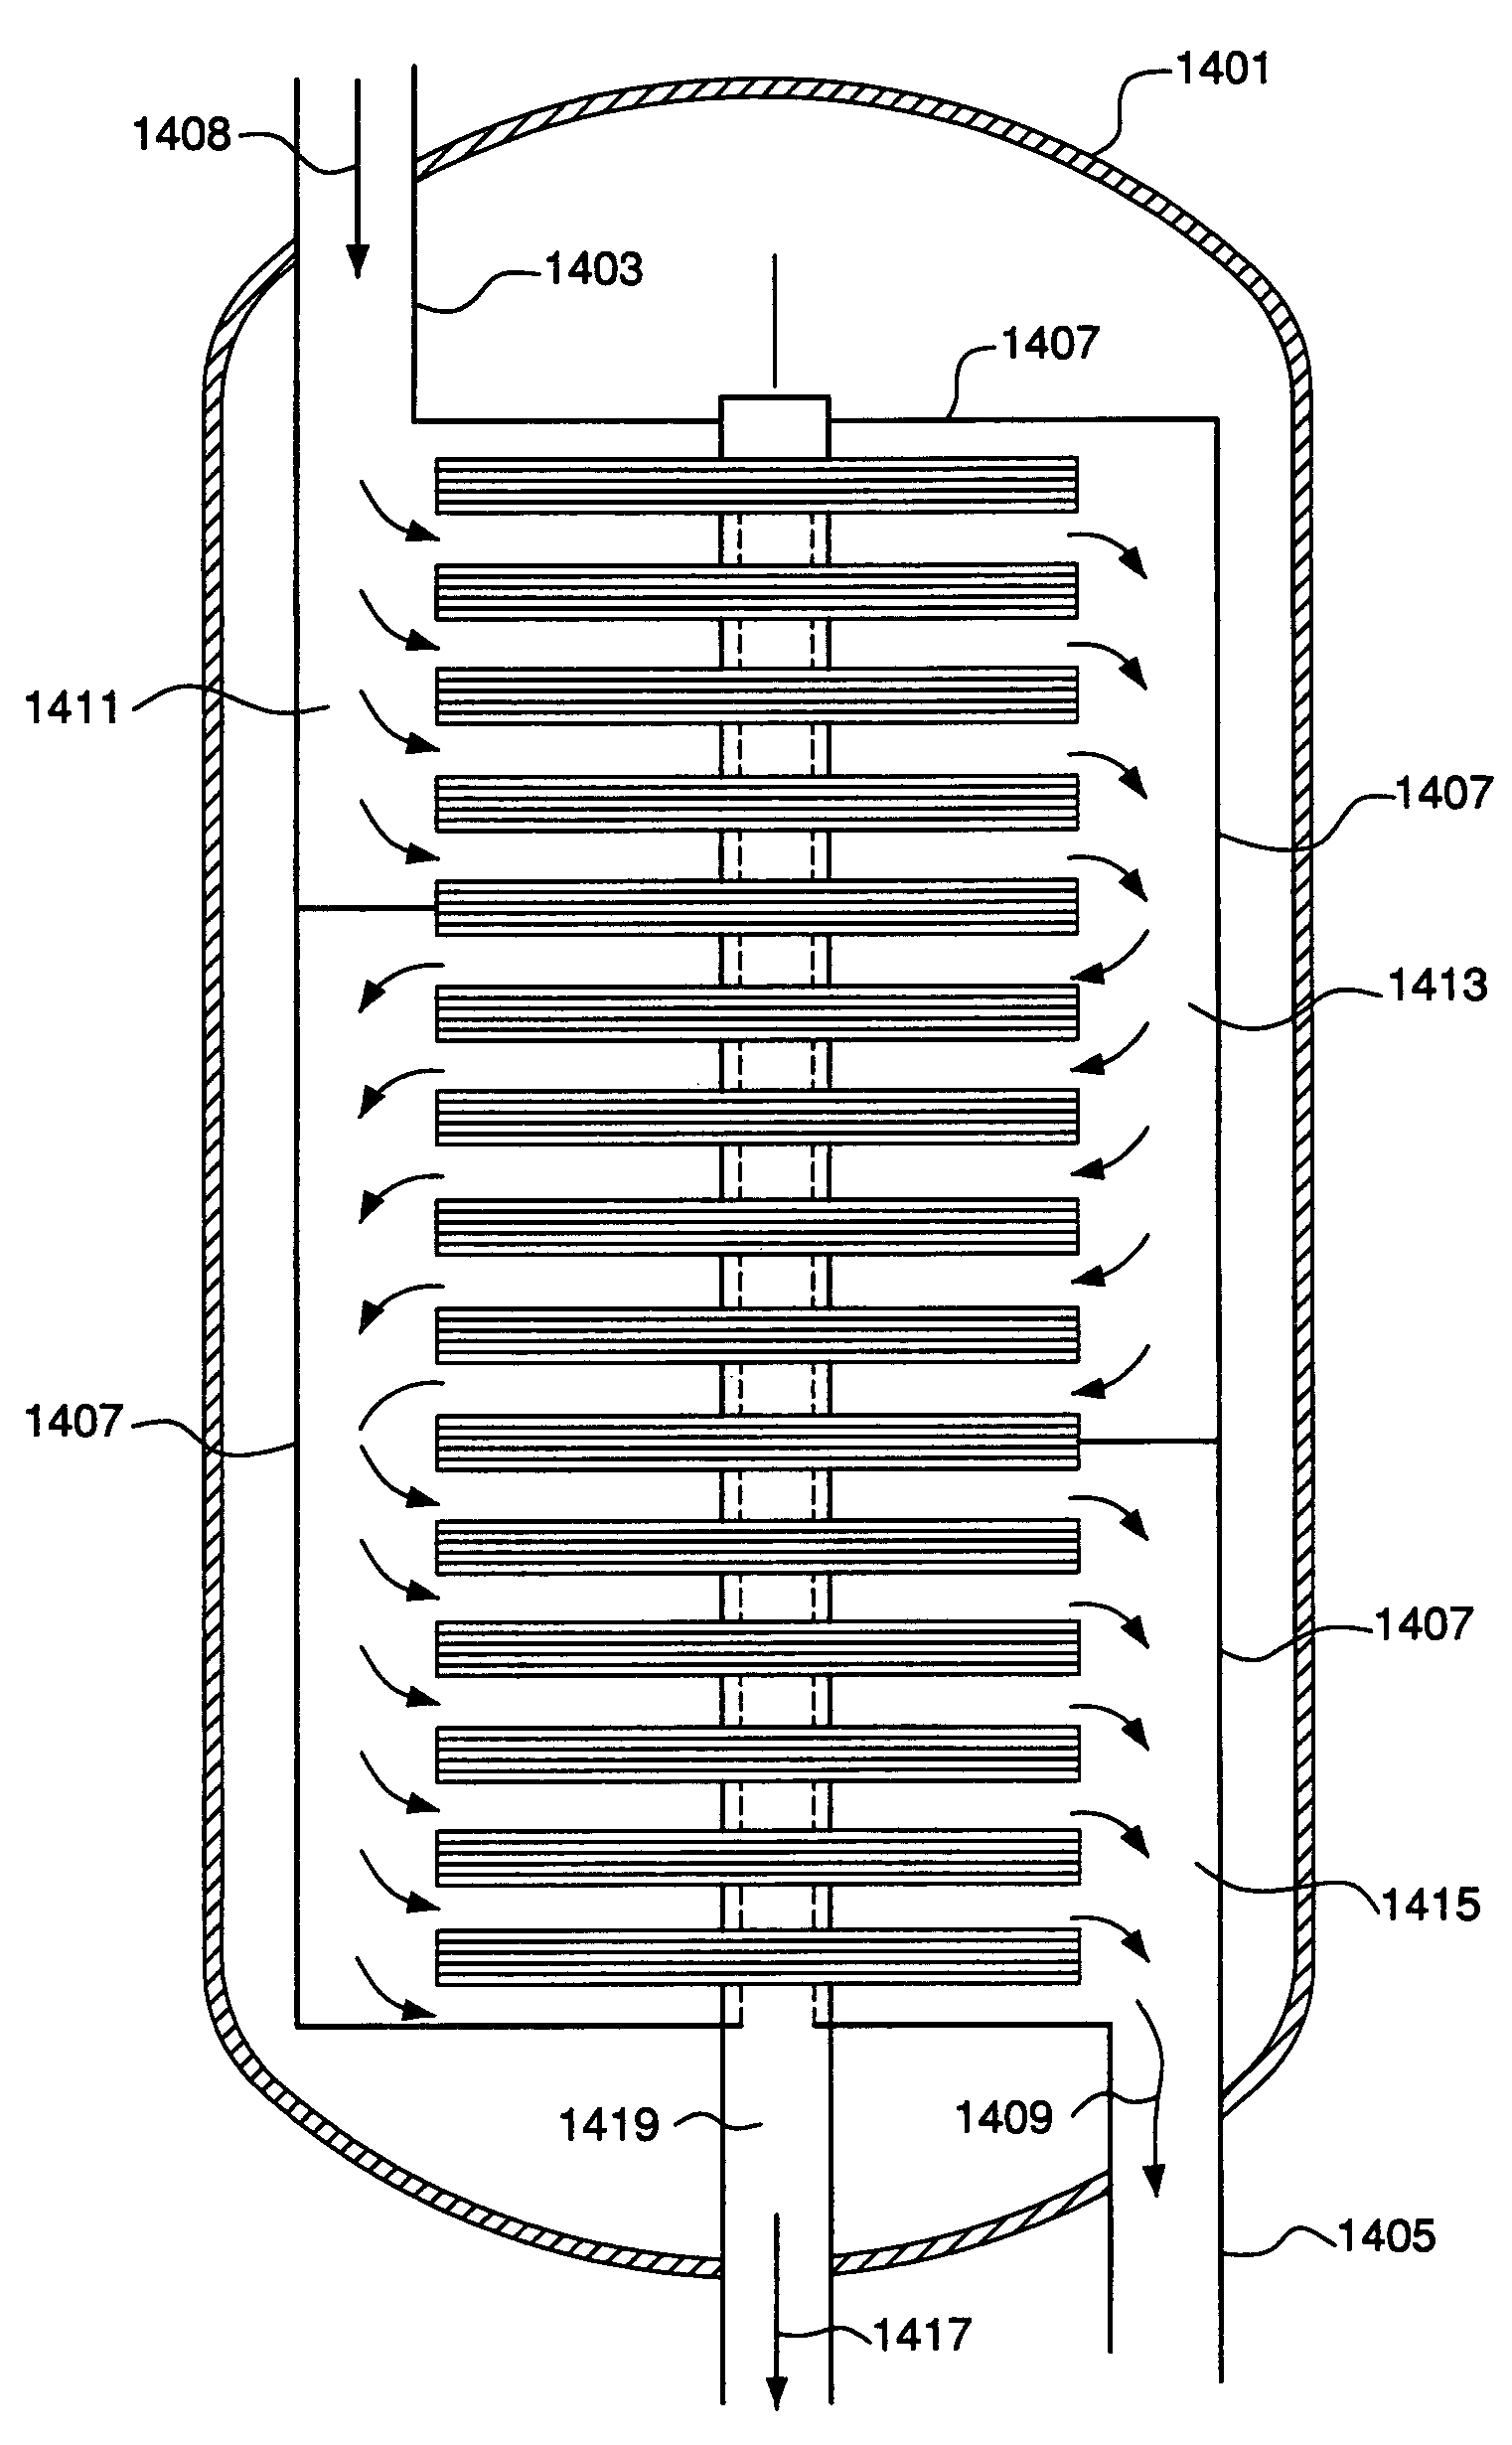 Ion transport membrane module and vessel system with directed internal gas flow